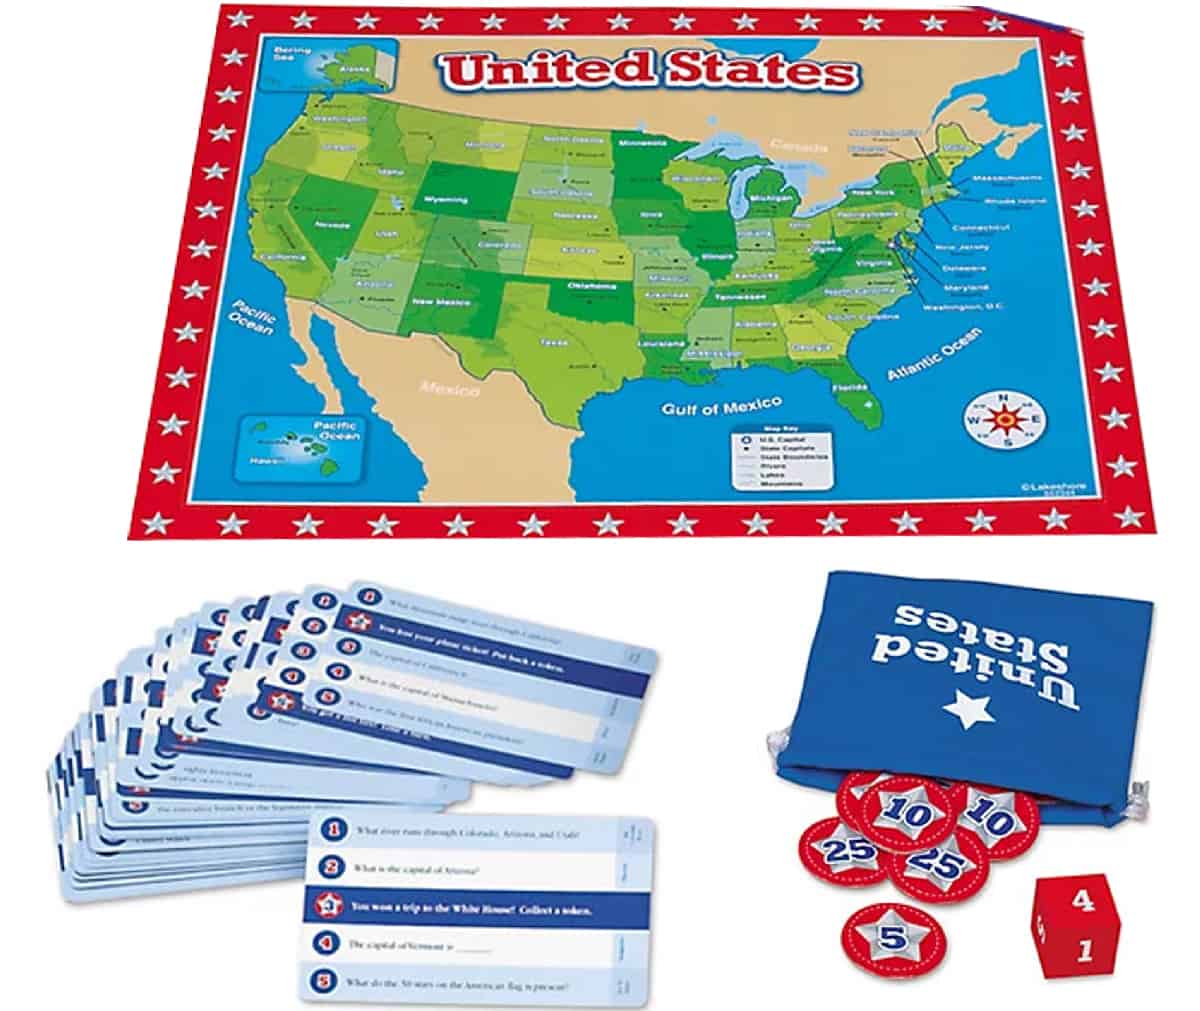 United States is a board game to learn and explore the history and geography of the USA.